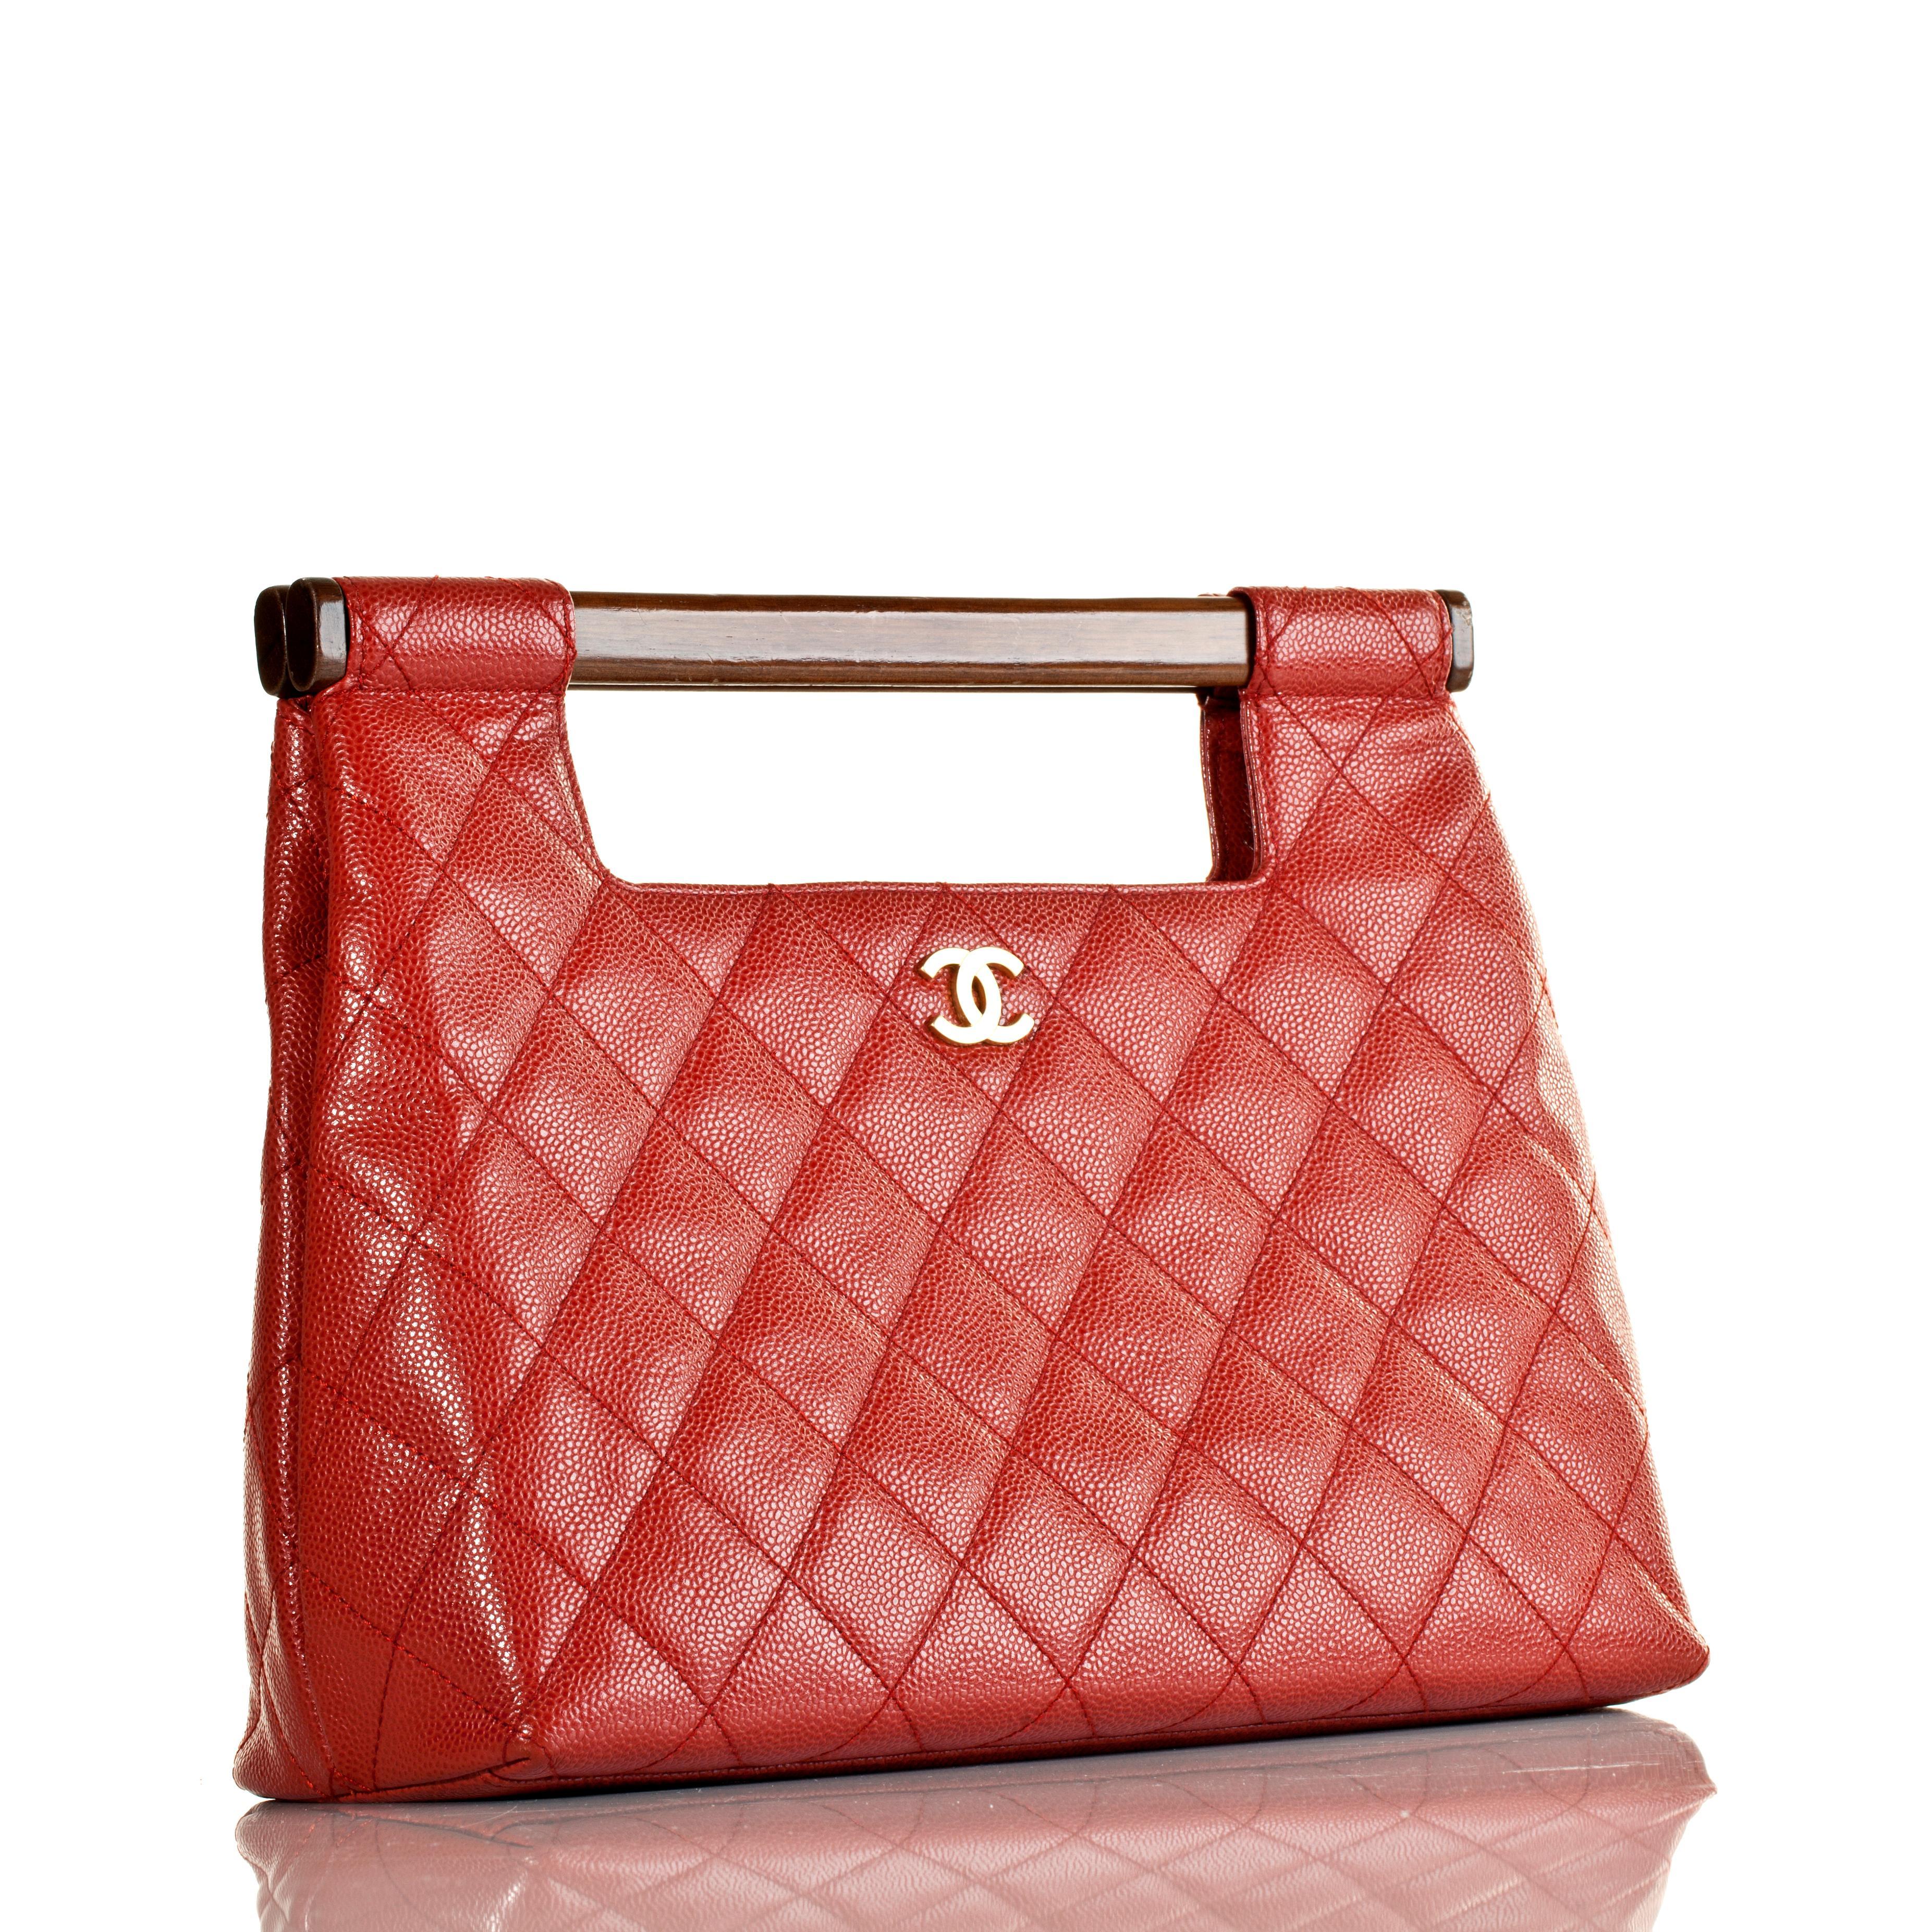 Chanel 2003 Holz Top Handle Rare Red Caviar Jumbo Kelly Envelope Clutch Tote Bag im Zustand „Gut“ im Angebot in Miami, FL